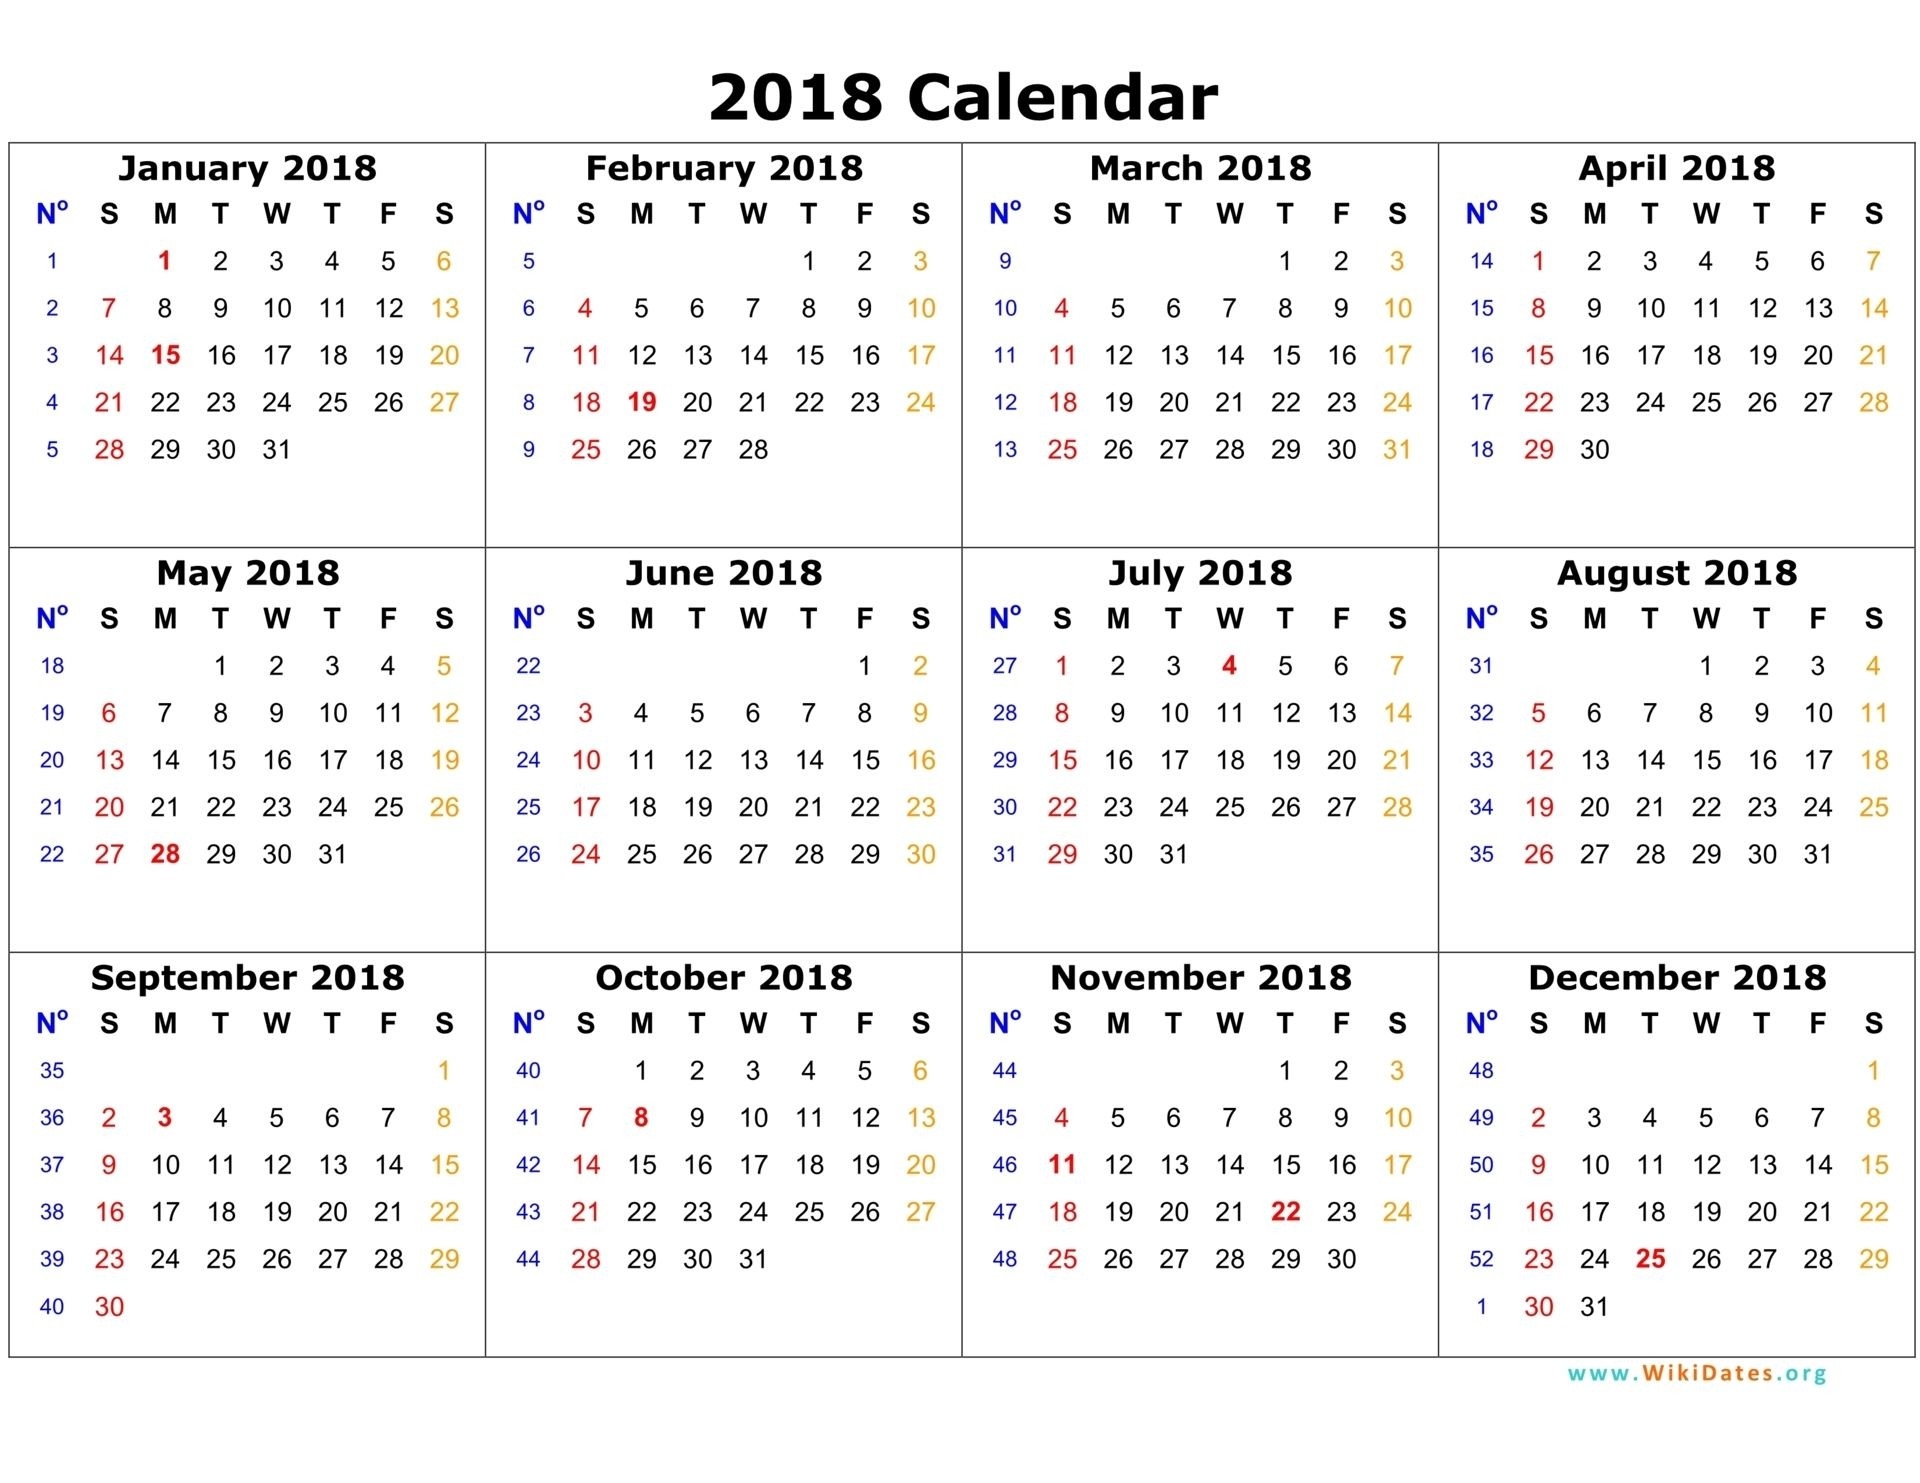 2018 Calendar On One Page | Calendar Template 2016 | Planner-Free Printable Calendars With Cagtholic And Muslim Holidays